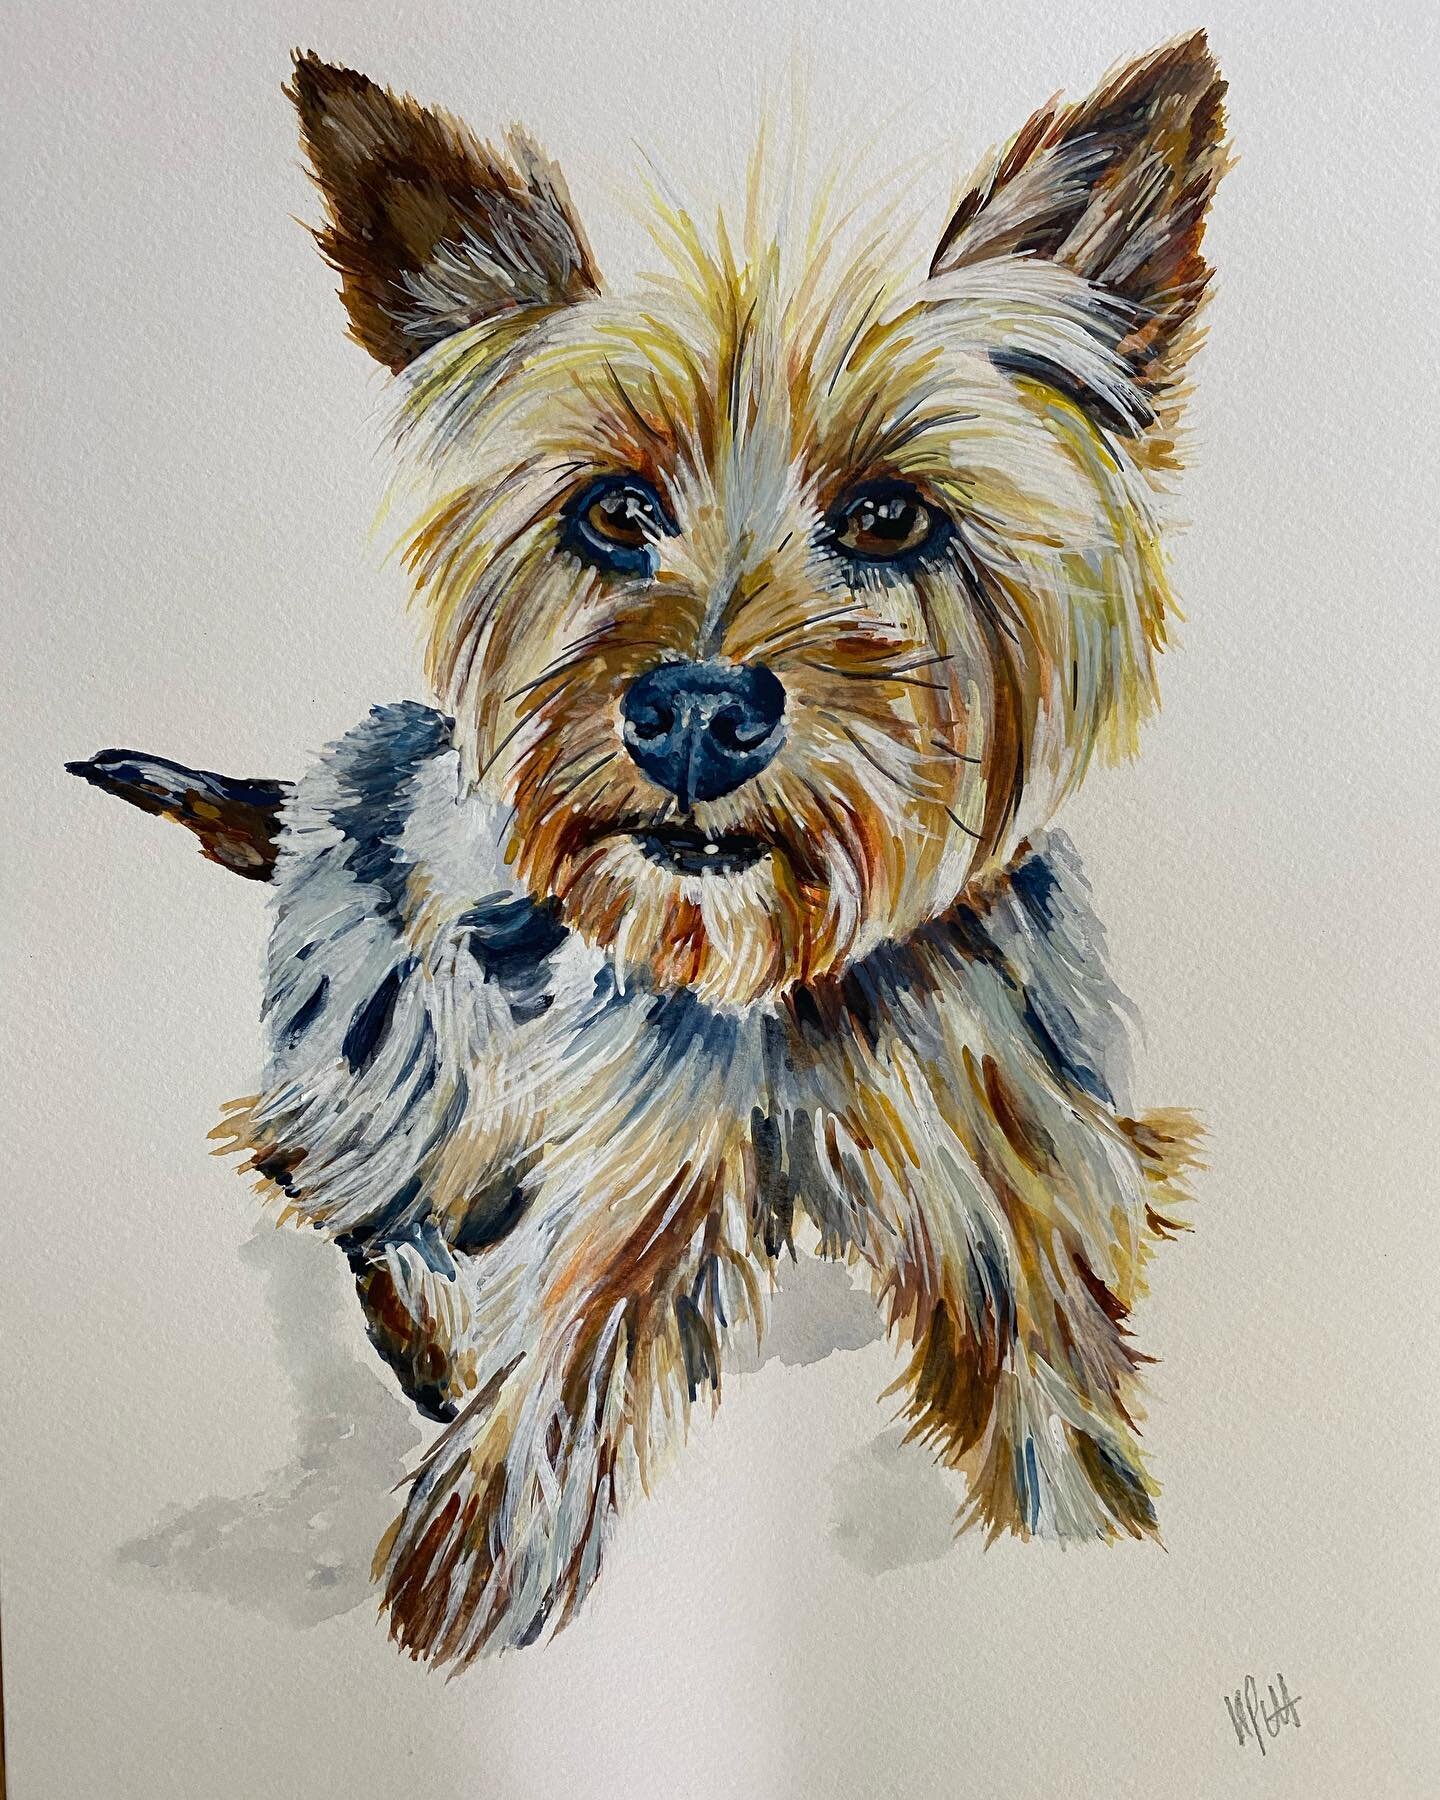 Sadie
Watercolor 
11x15

Hoping this painting is a lovely surprise for it&rsquo;s new owner